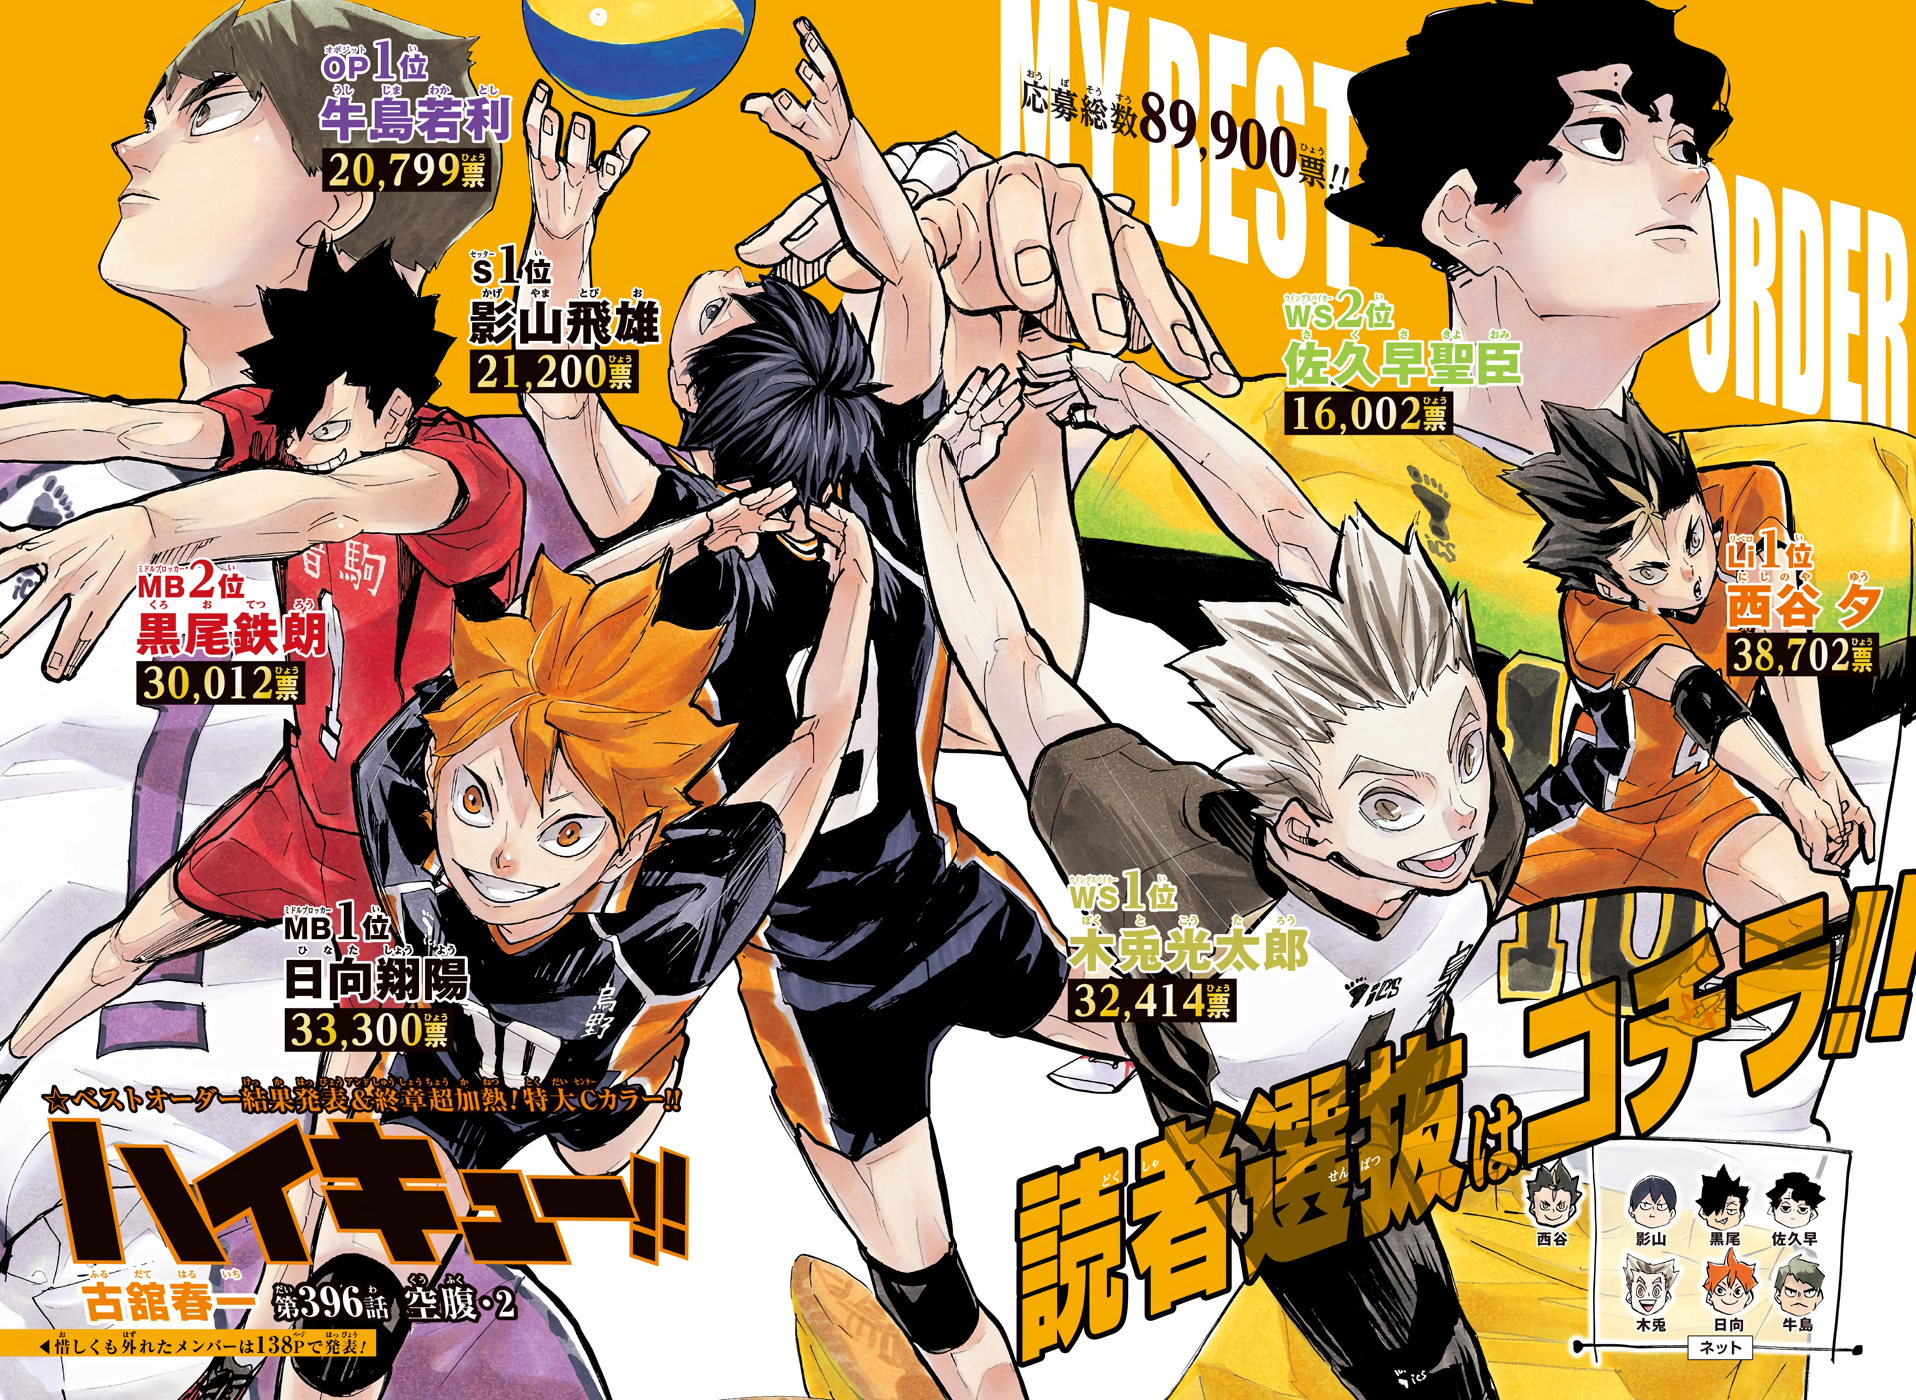 Haikyuu! manga artist scores big with special sketch for movie teaser -  Hindustan Times